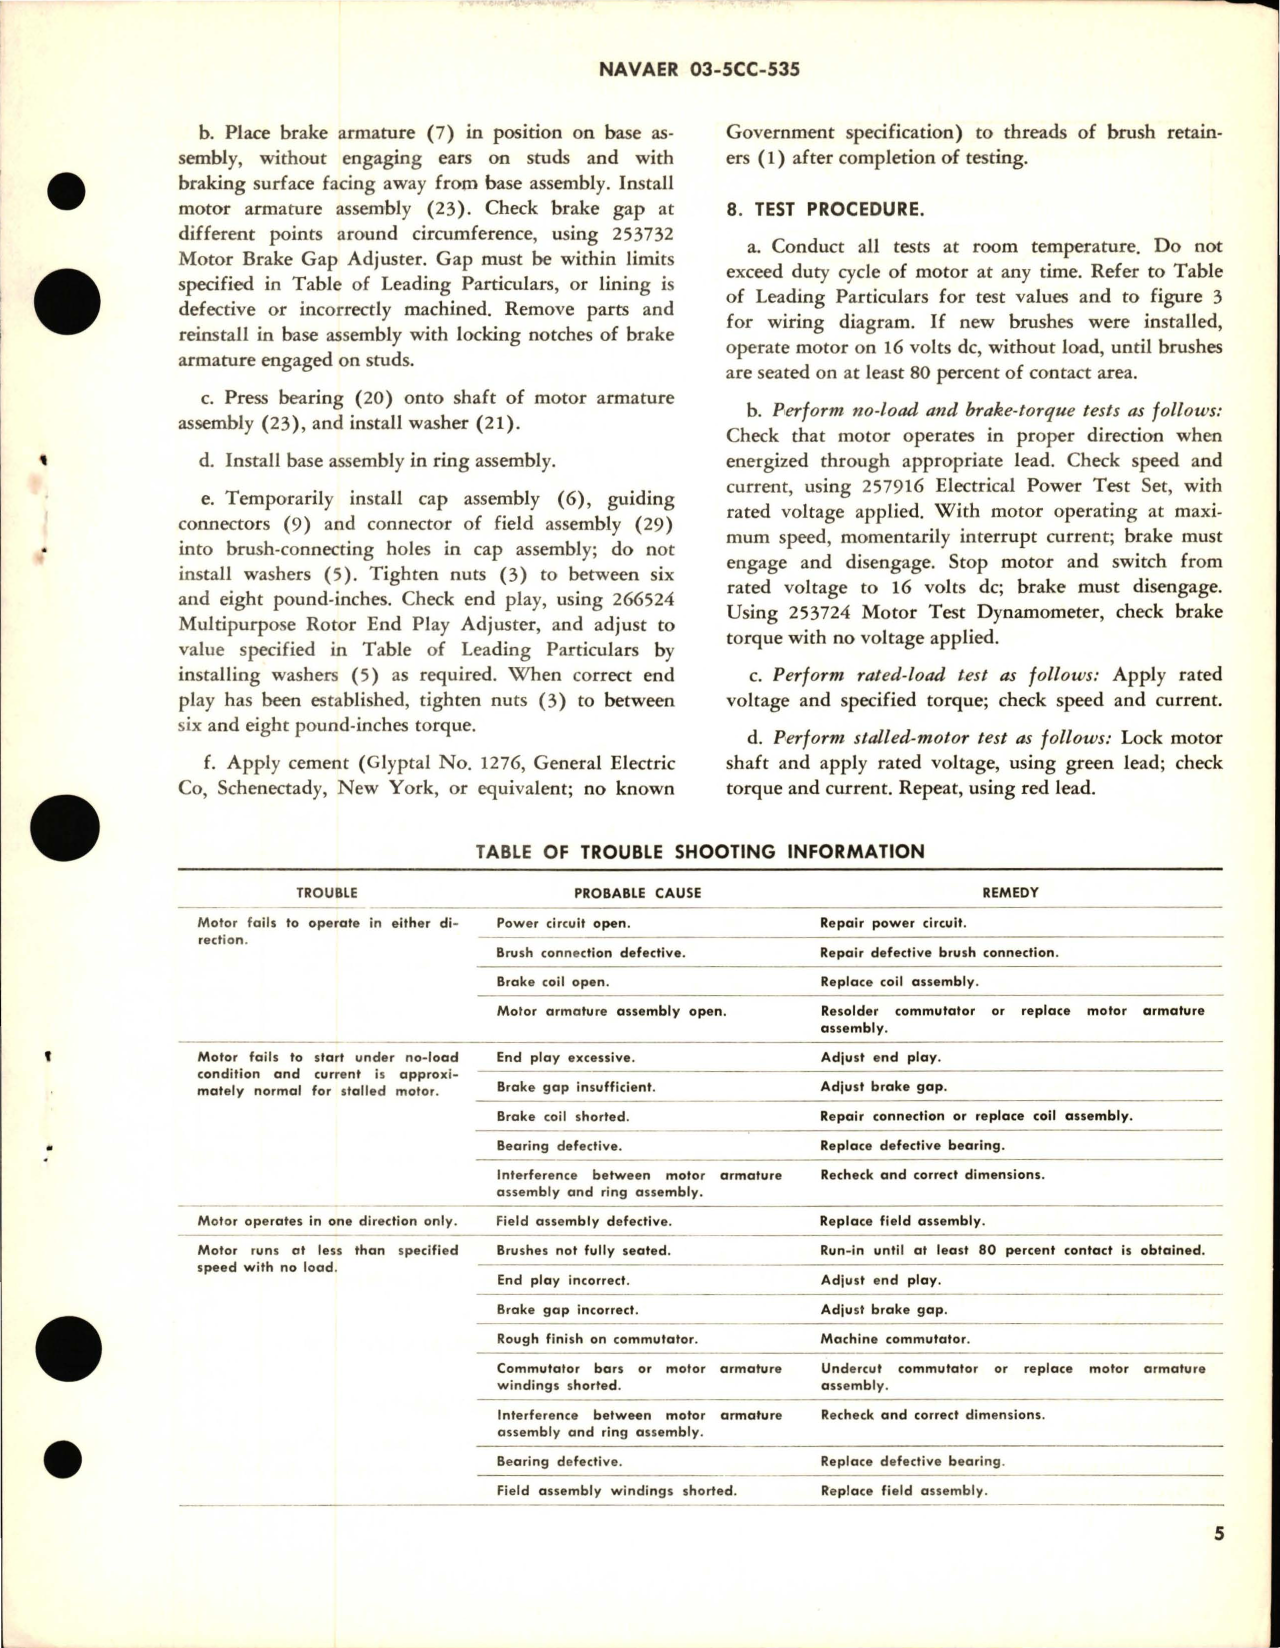 Sample page 5 from AirCorps Library document: Overhaul Instructions with Parts Breakdown for Aircraft Direct Current Motors - Parts 32741 and 32741-1 